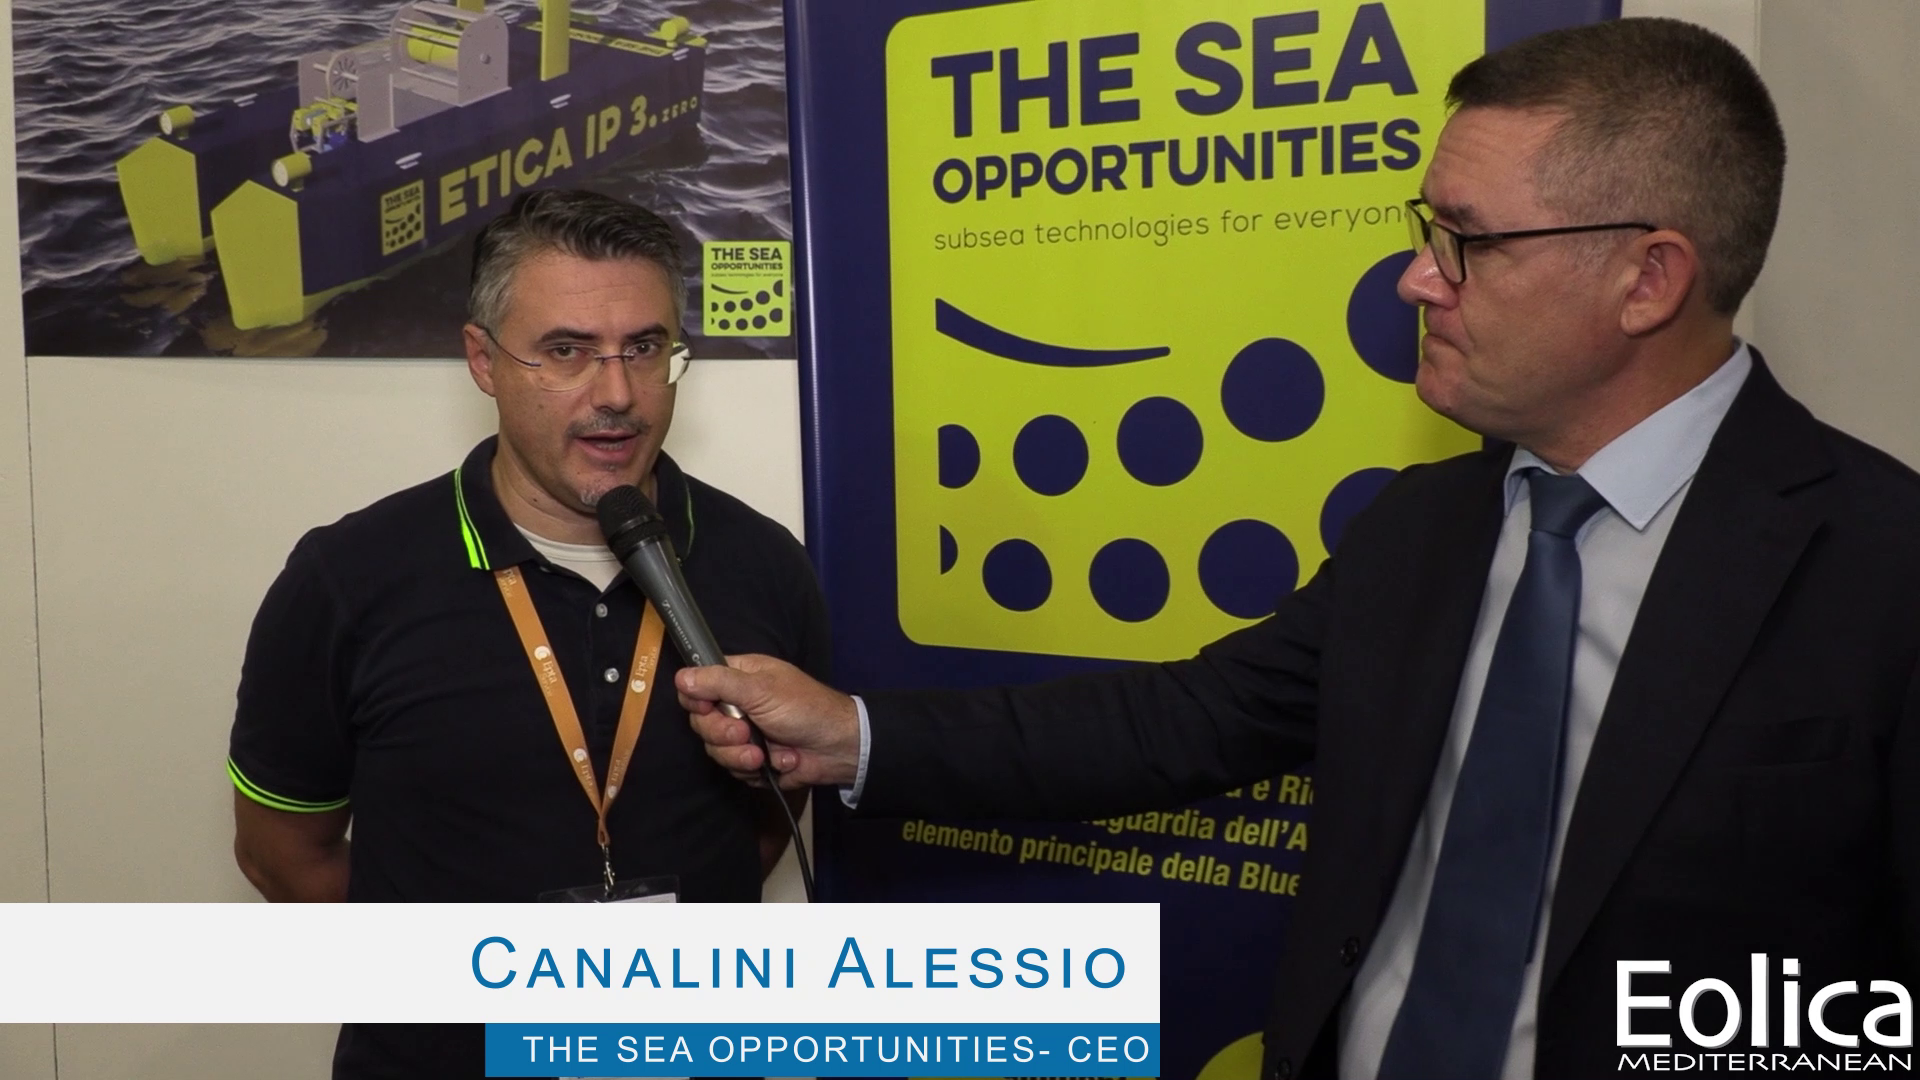 EOLICA MEDITERRANEAN 2022 – THE SEA OPPORTUNITIES – Interview – Official Video